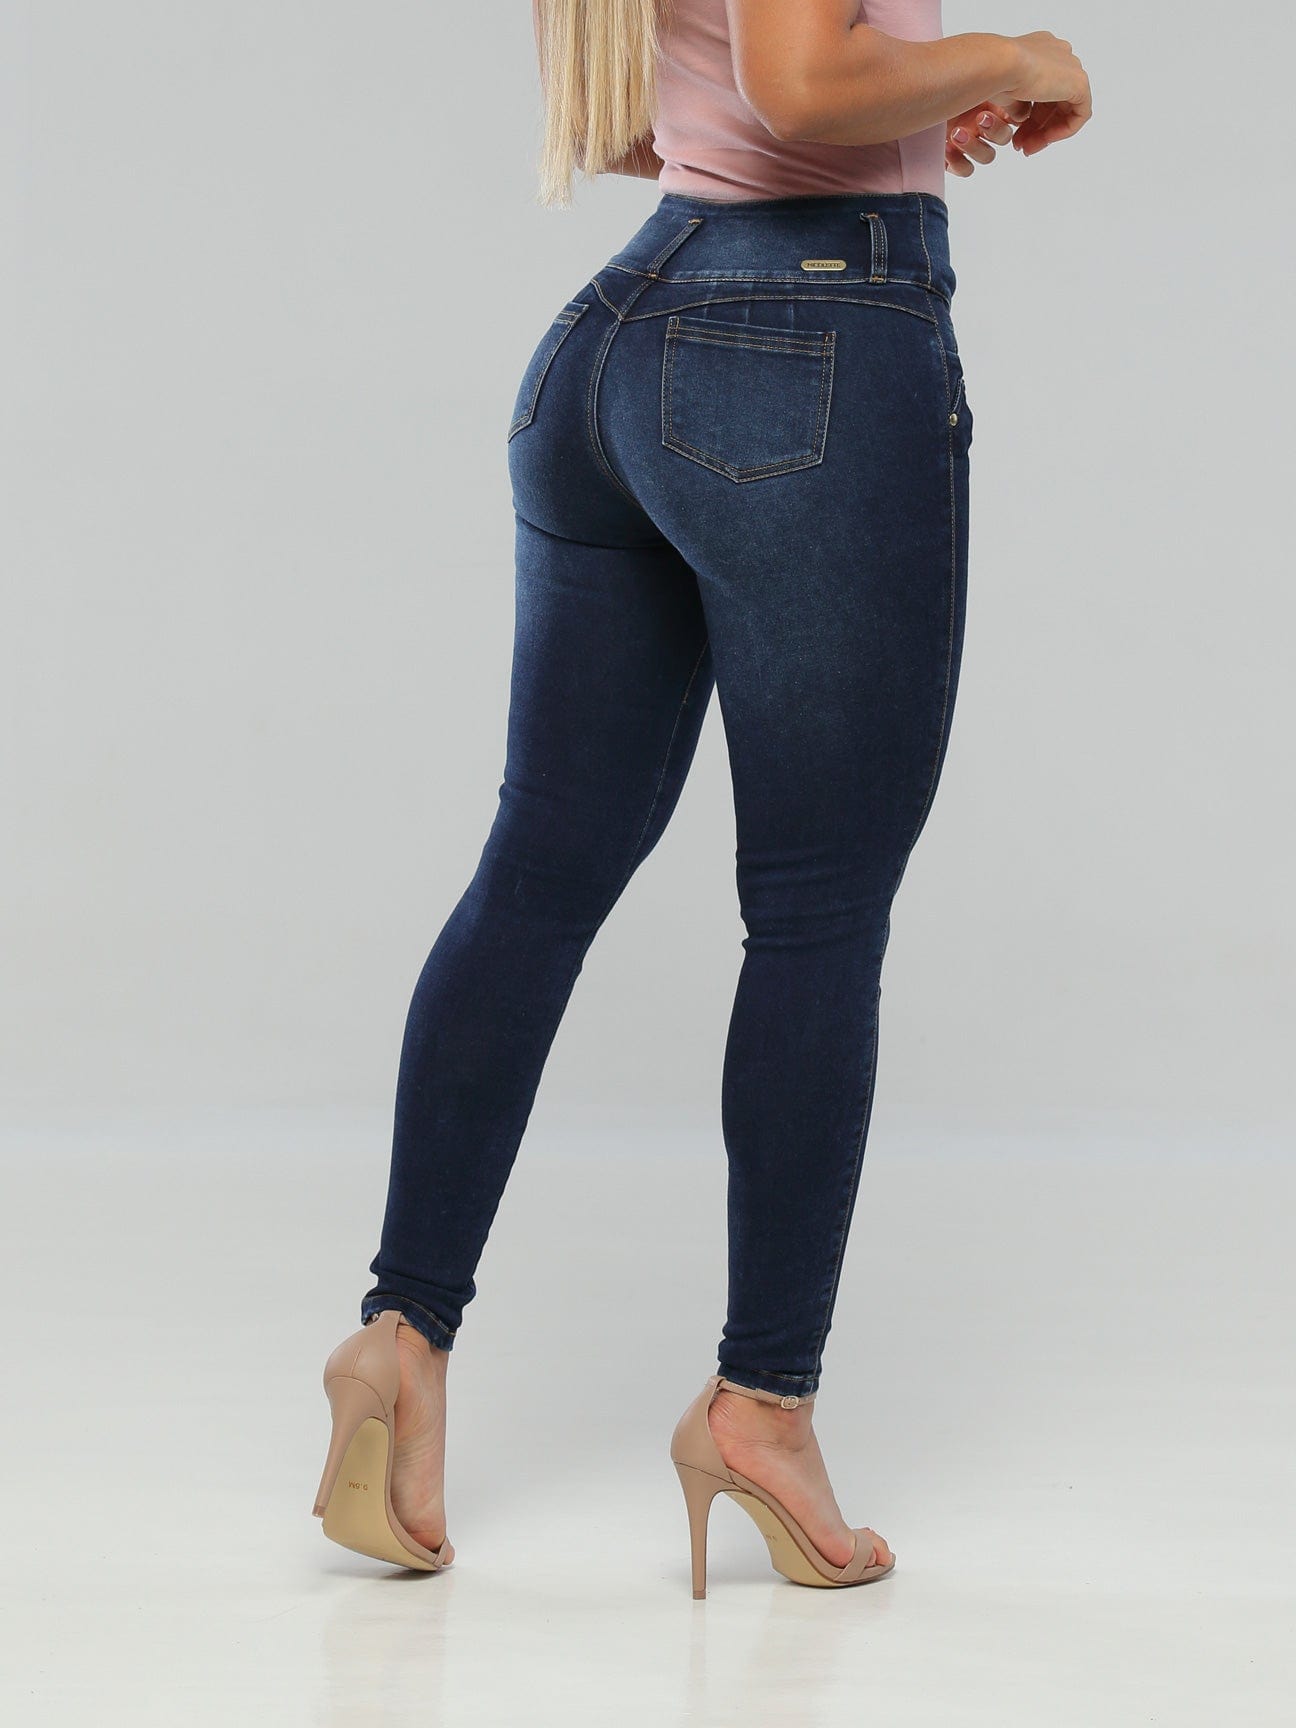 XC BUTT LIFTING JEANS